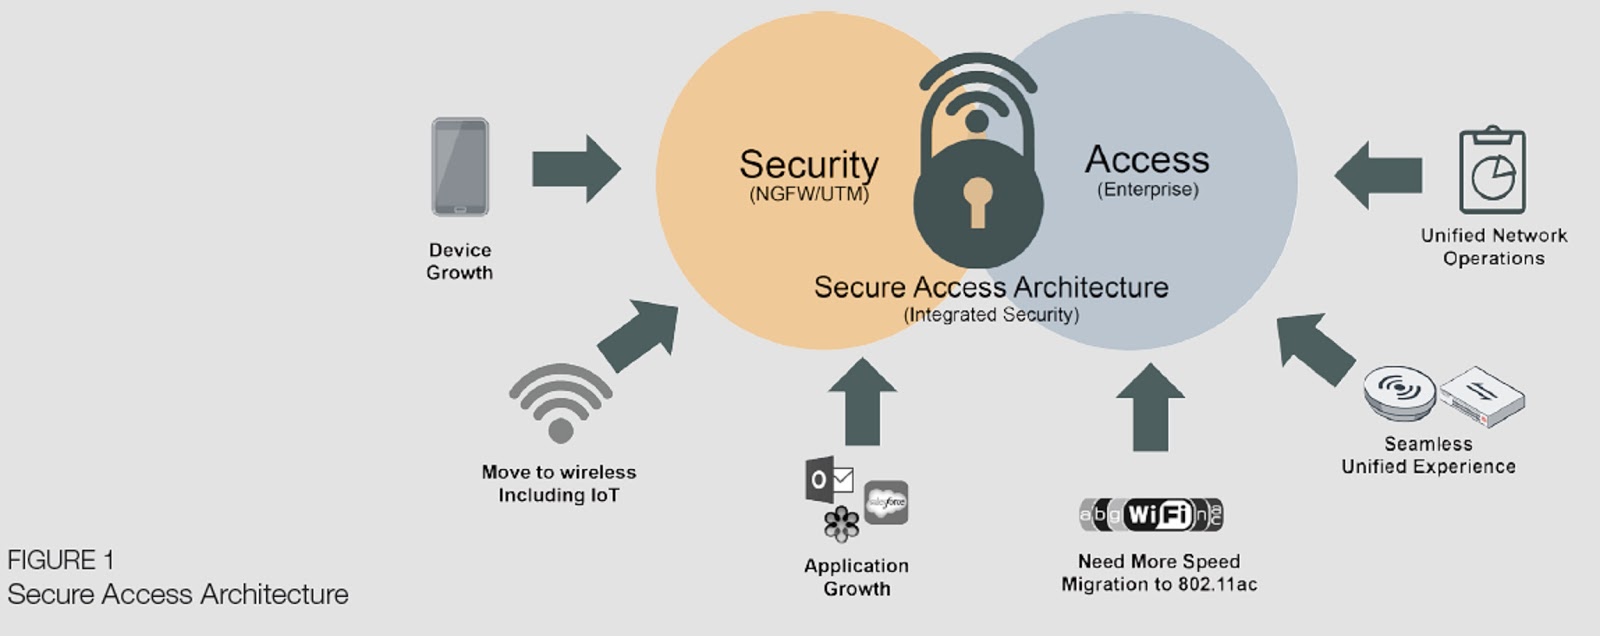 Such as access to. Network Security device. Applications of Network Security. Security in Wireless Networks. Secure access.